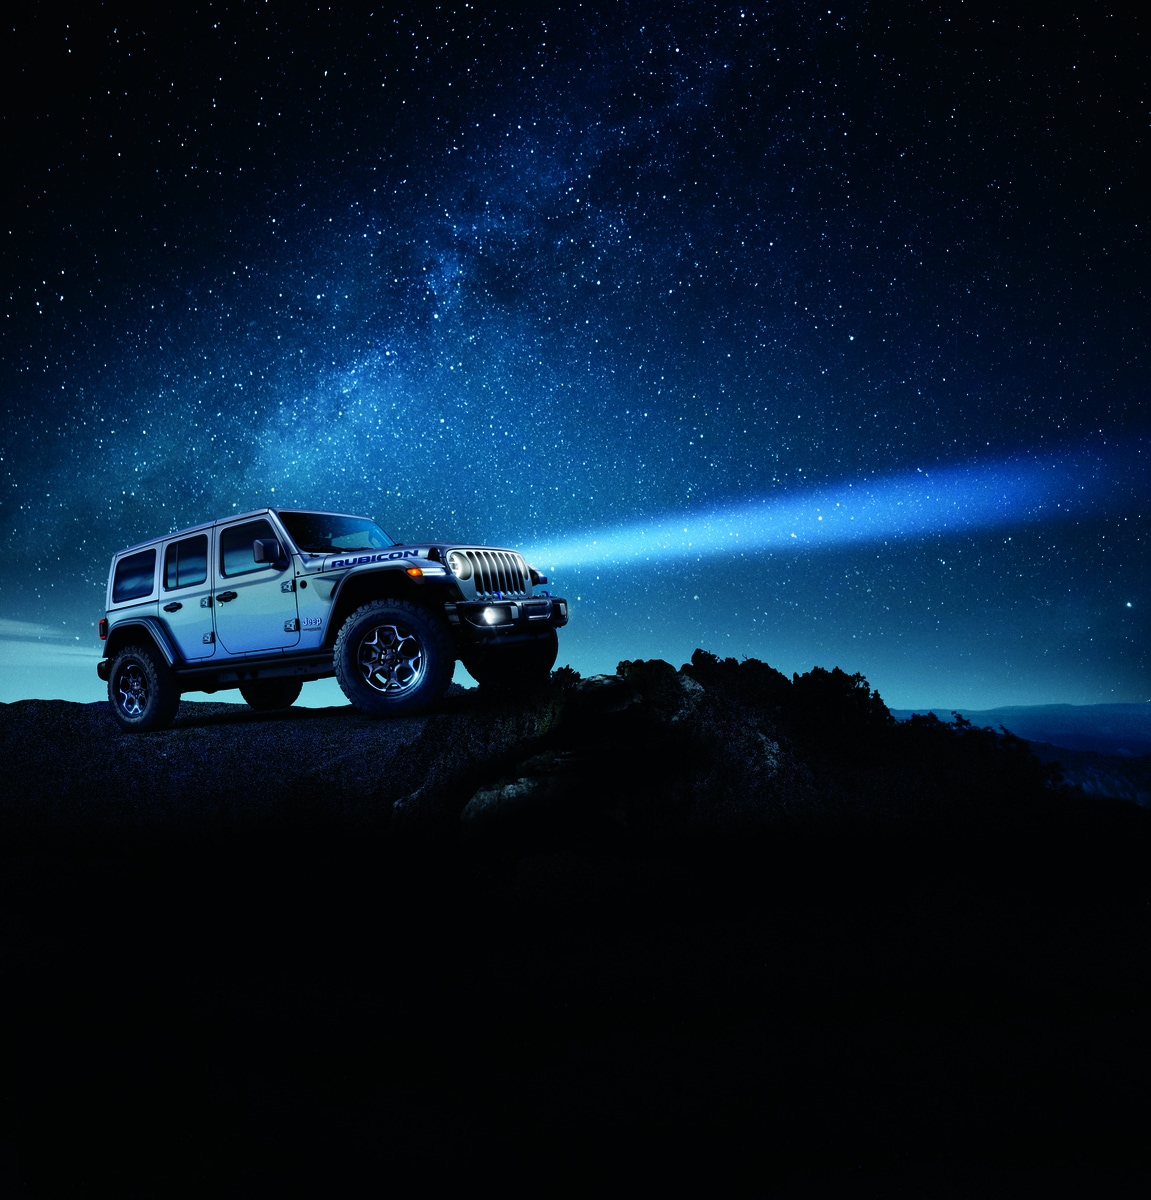 silver Jeep Wrangler Rubicon SUV parked on a rock under a very starry night sky